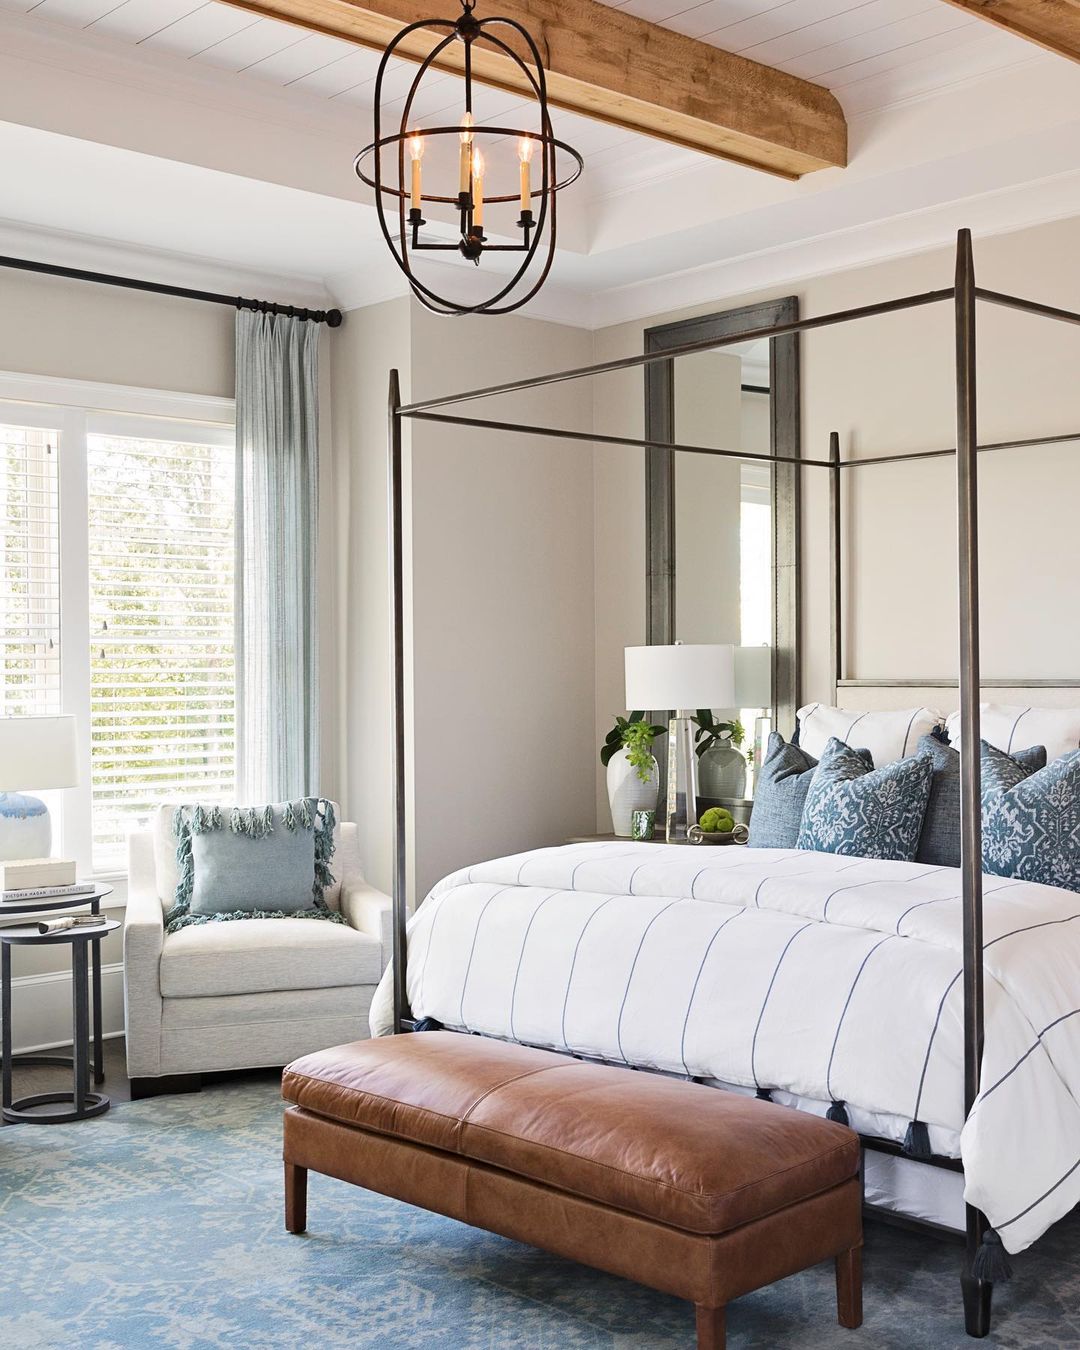 modern four-poster bed in a transitional styled bedroom. Photo by Instagram user @ashleymartinhome